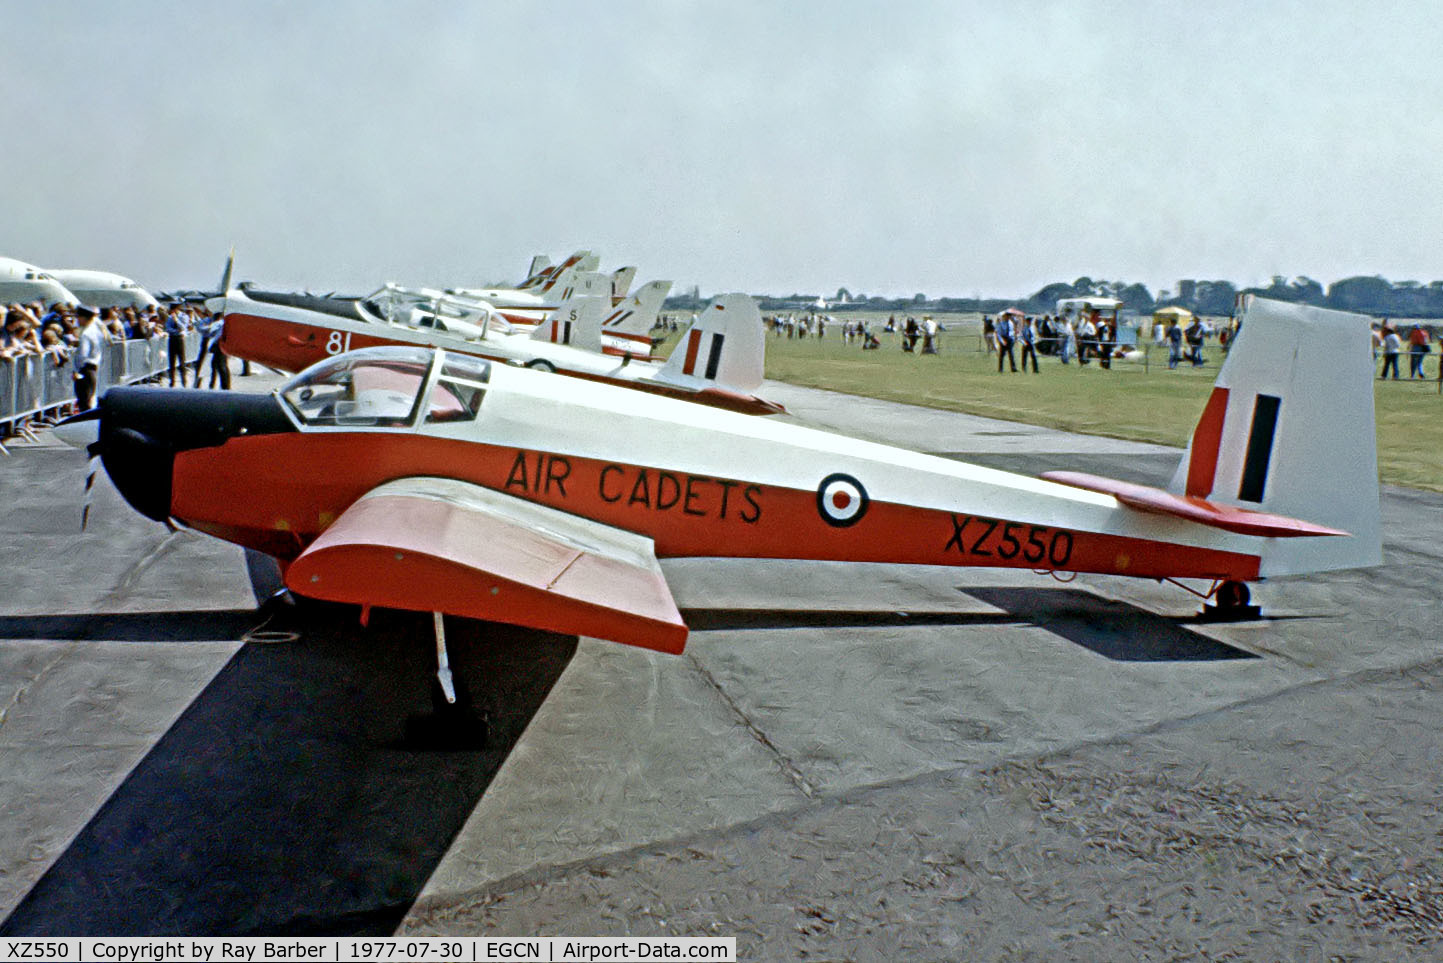 XZ550, 1981 Slingsby T-61F Venture T2 C/N 1870, Slingsby T.61F Venture [1870] (Air Cadets) RAF Finningley~G 30/07/1977. From a slide.